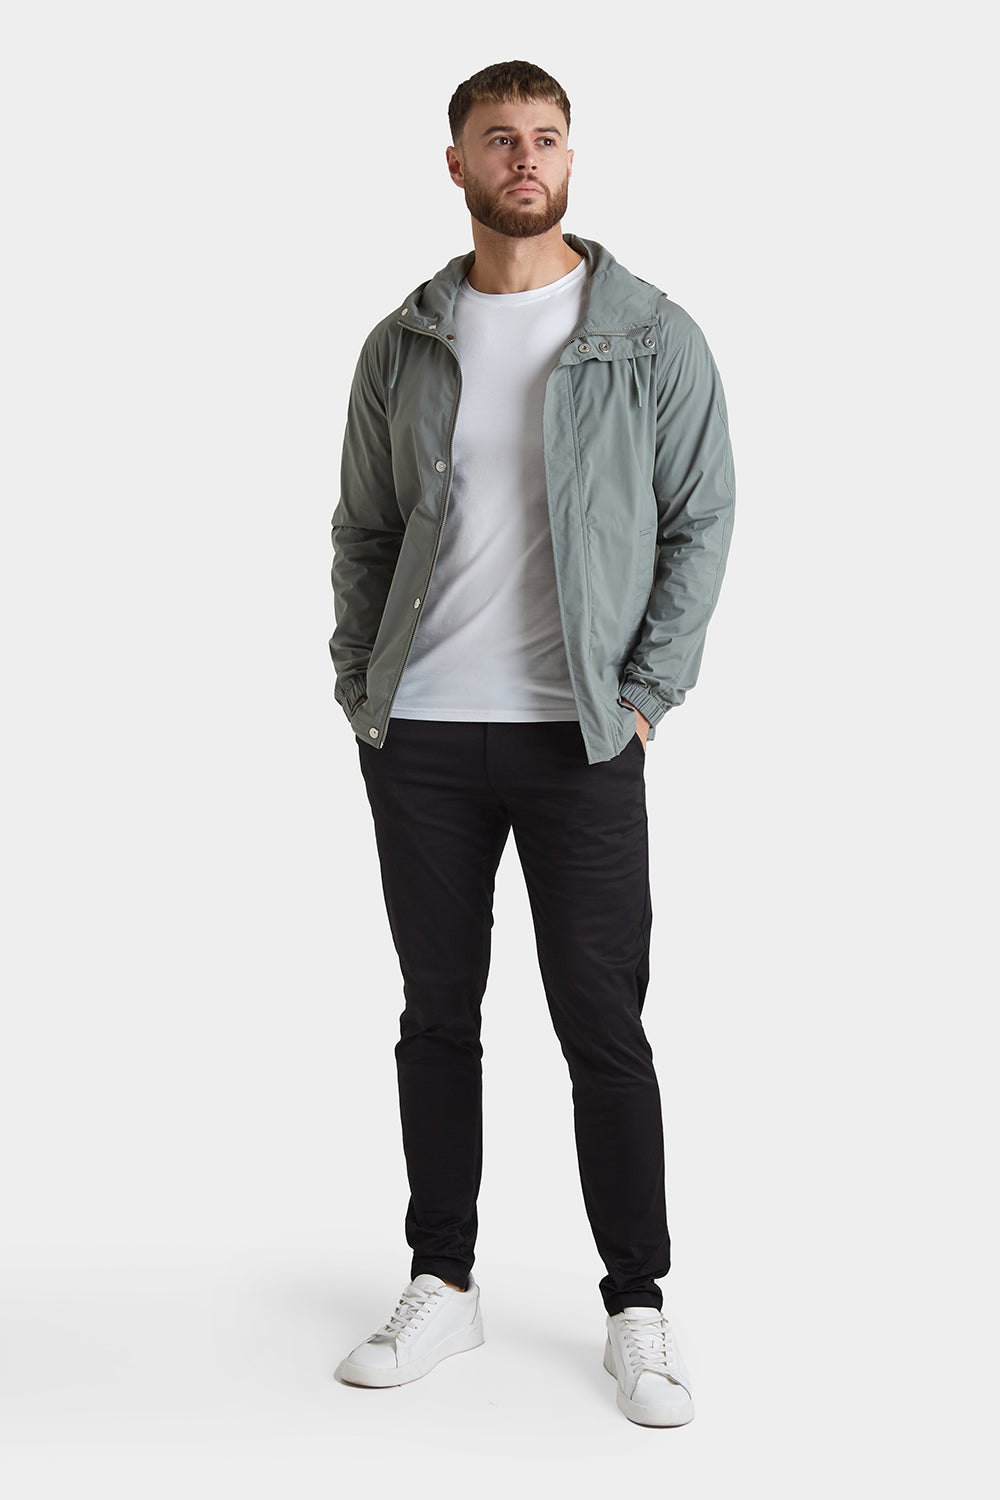 Storm Jacket in Sage - TAILORED ATHLETE - ROW